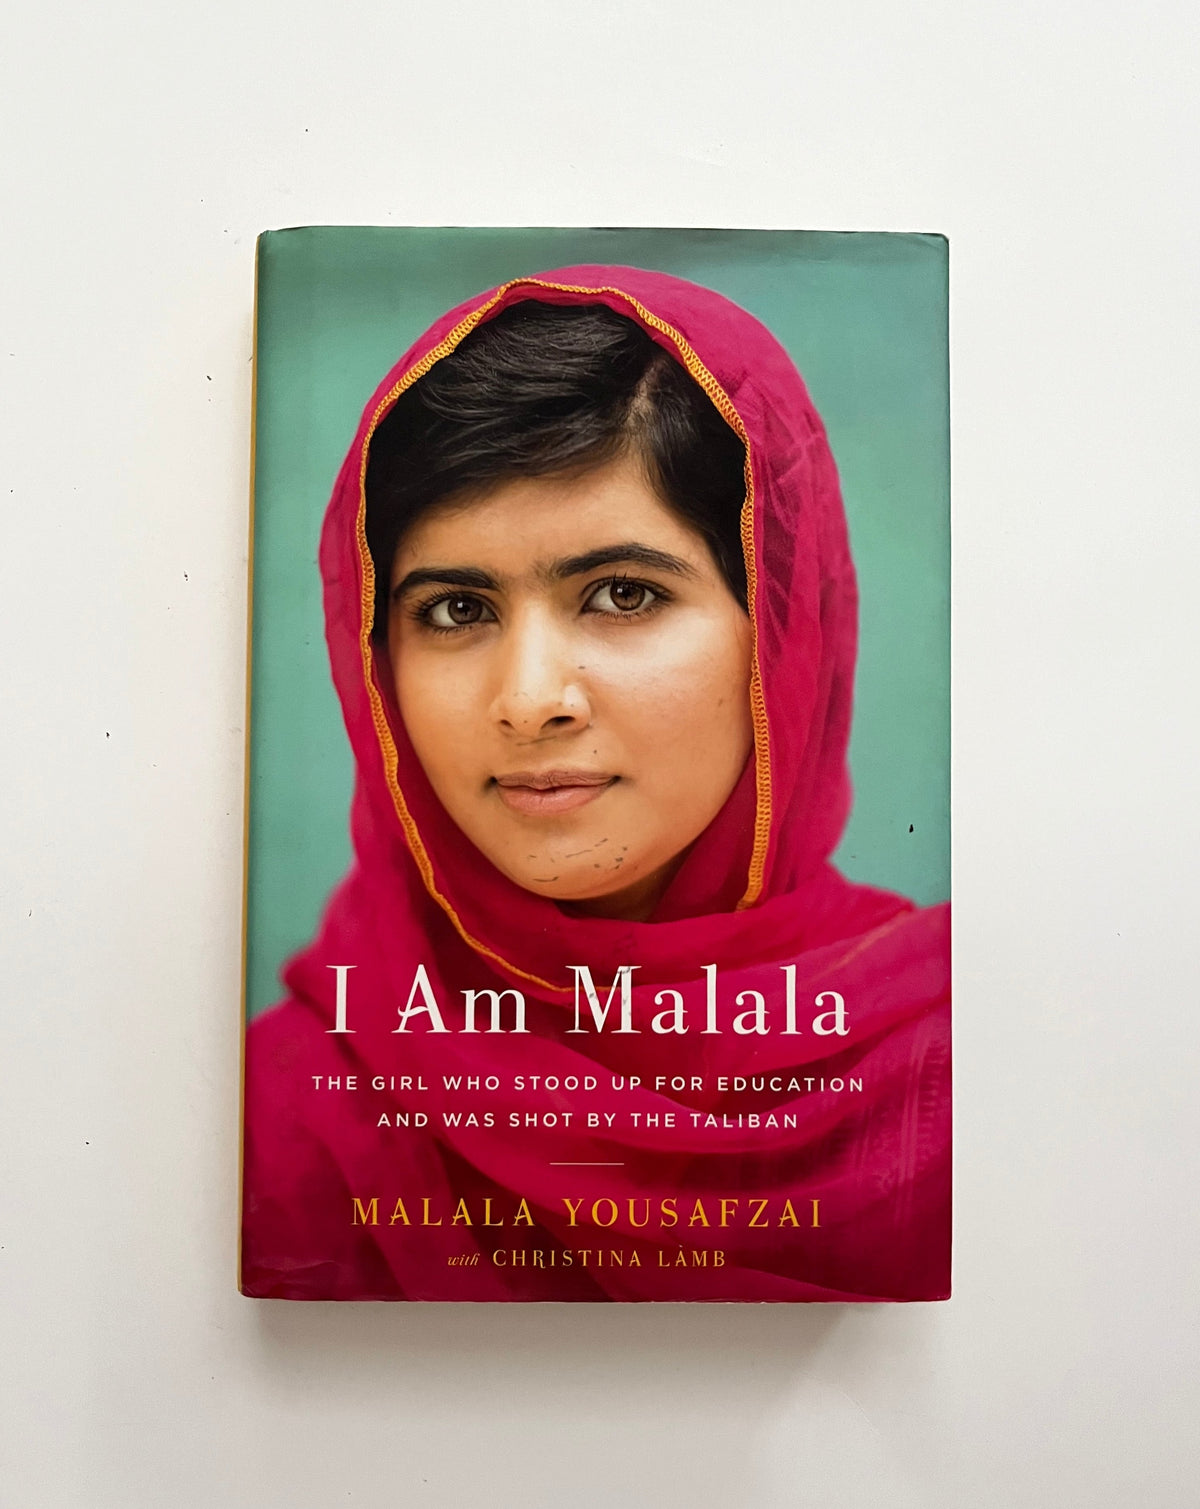 I Am Malala: How One Girl Stood Up for Education and Changed the World by Malala Yousafzai